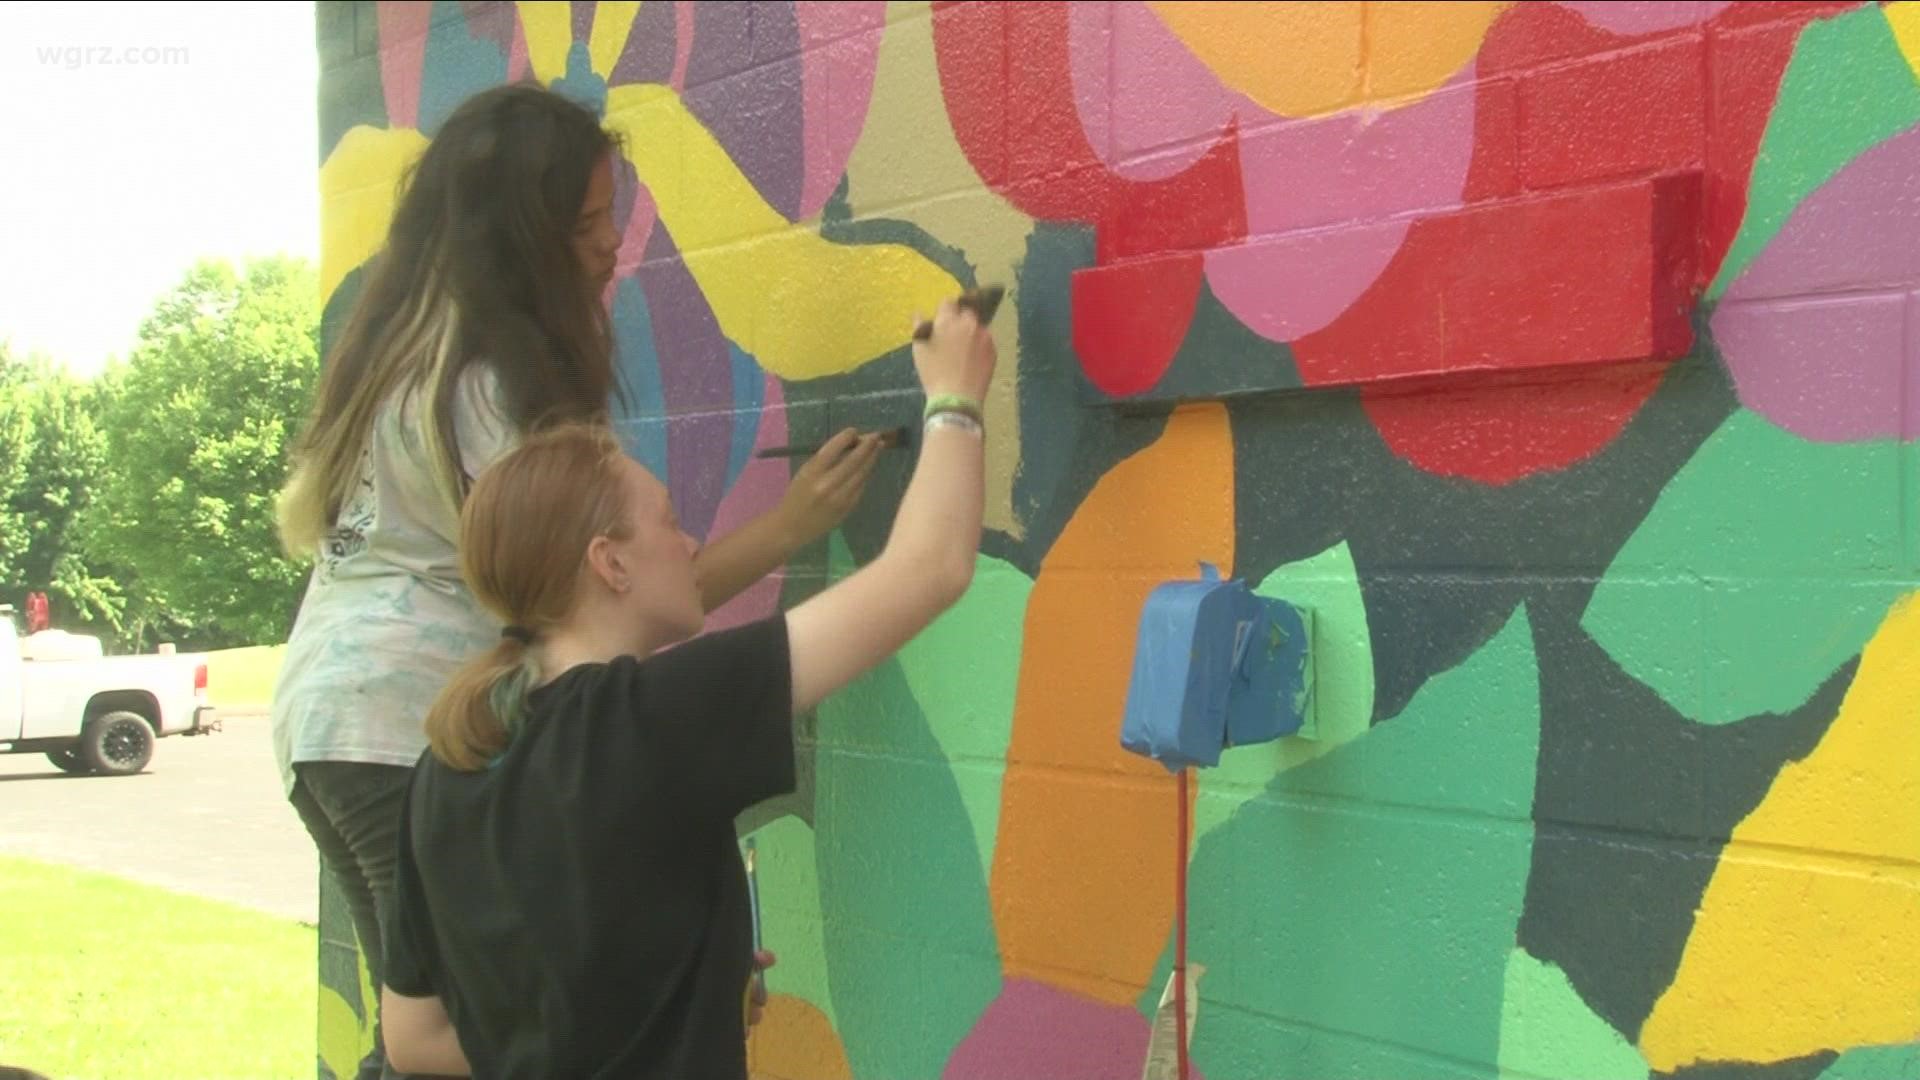 The students spent three days working on their masterpiece, located on a building in Bullard Park in Albion.